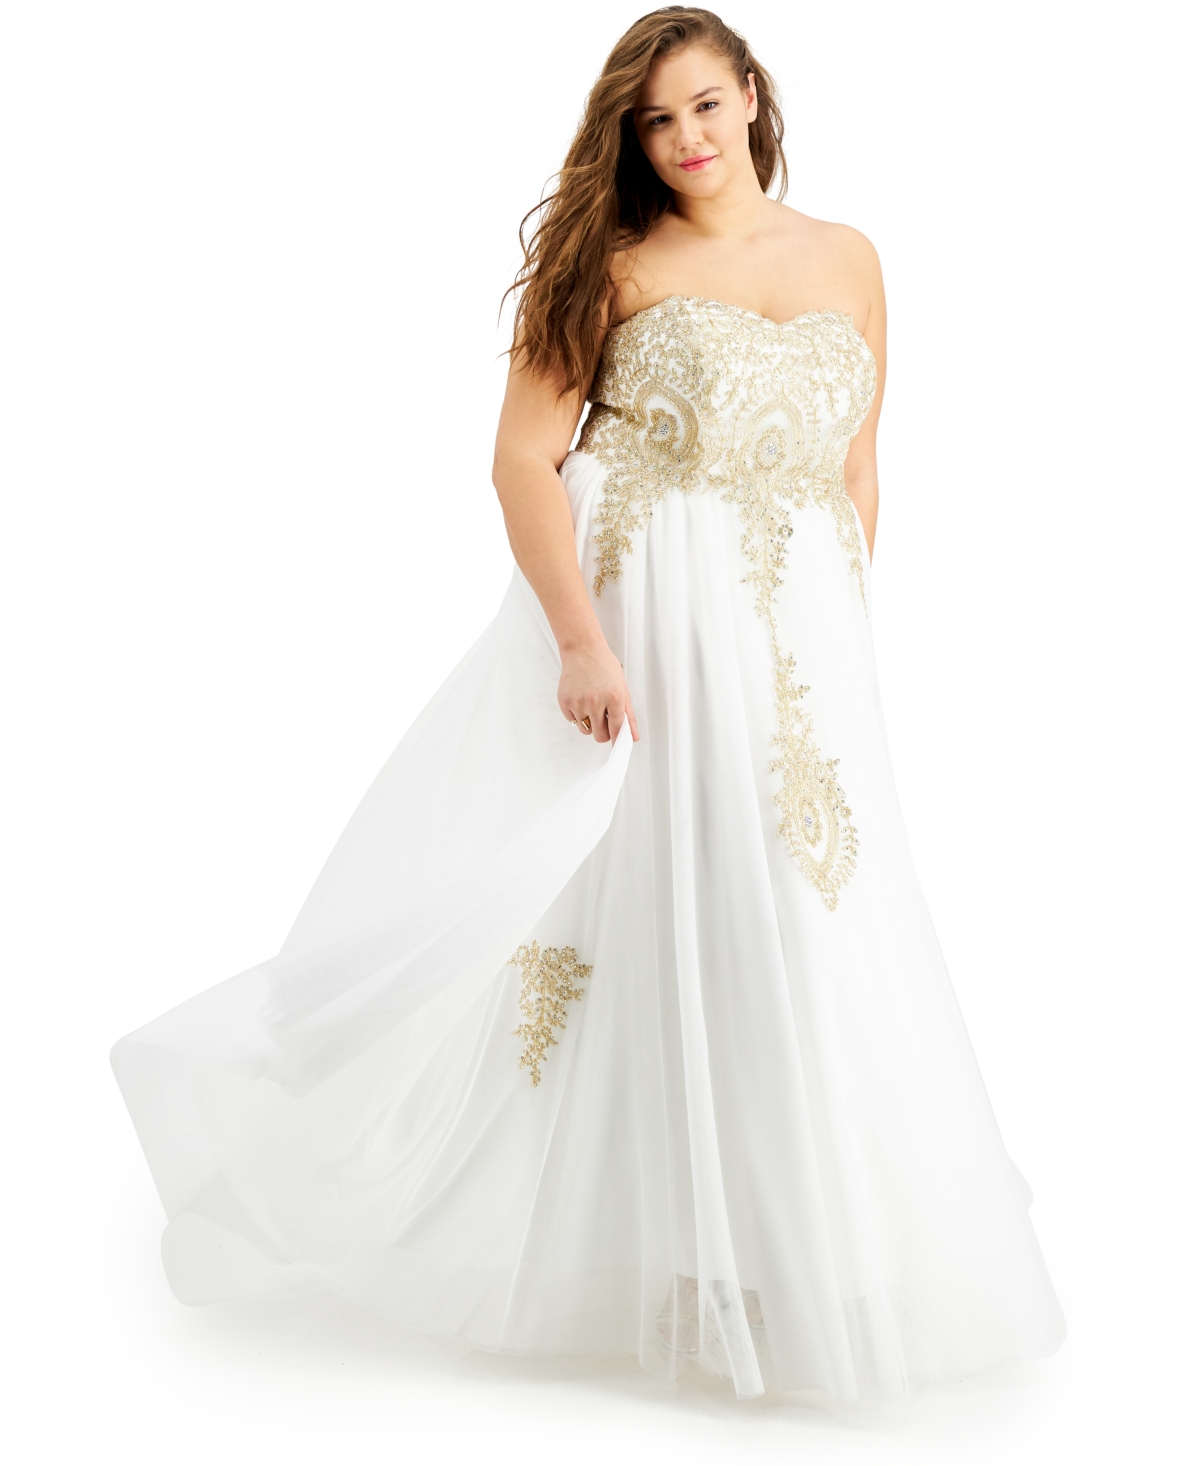 Trendy Plus Size Strapless Embellished Gown, Created for Macy's - Ivory/Gold